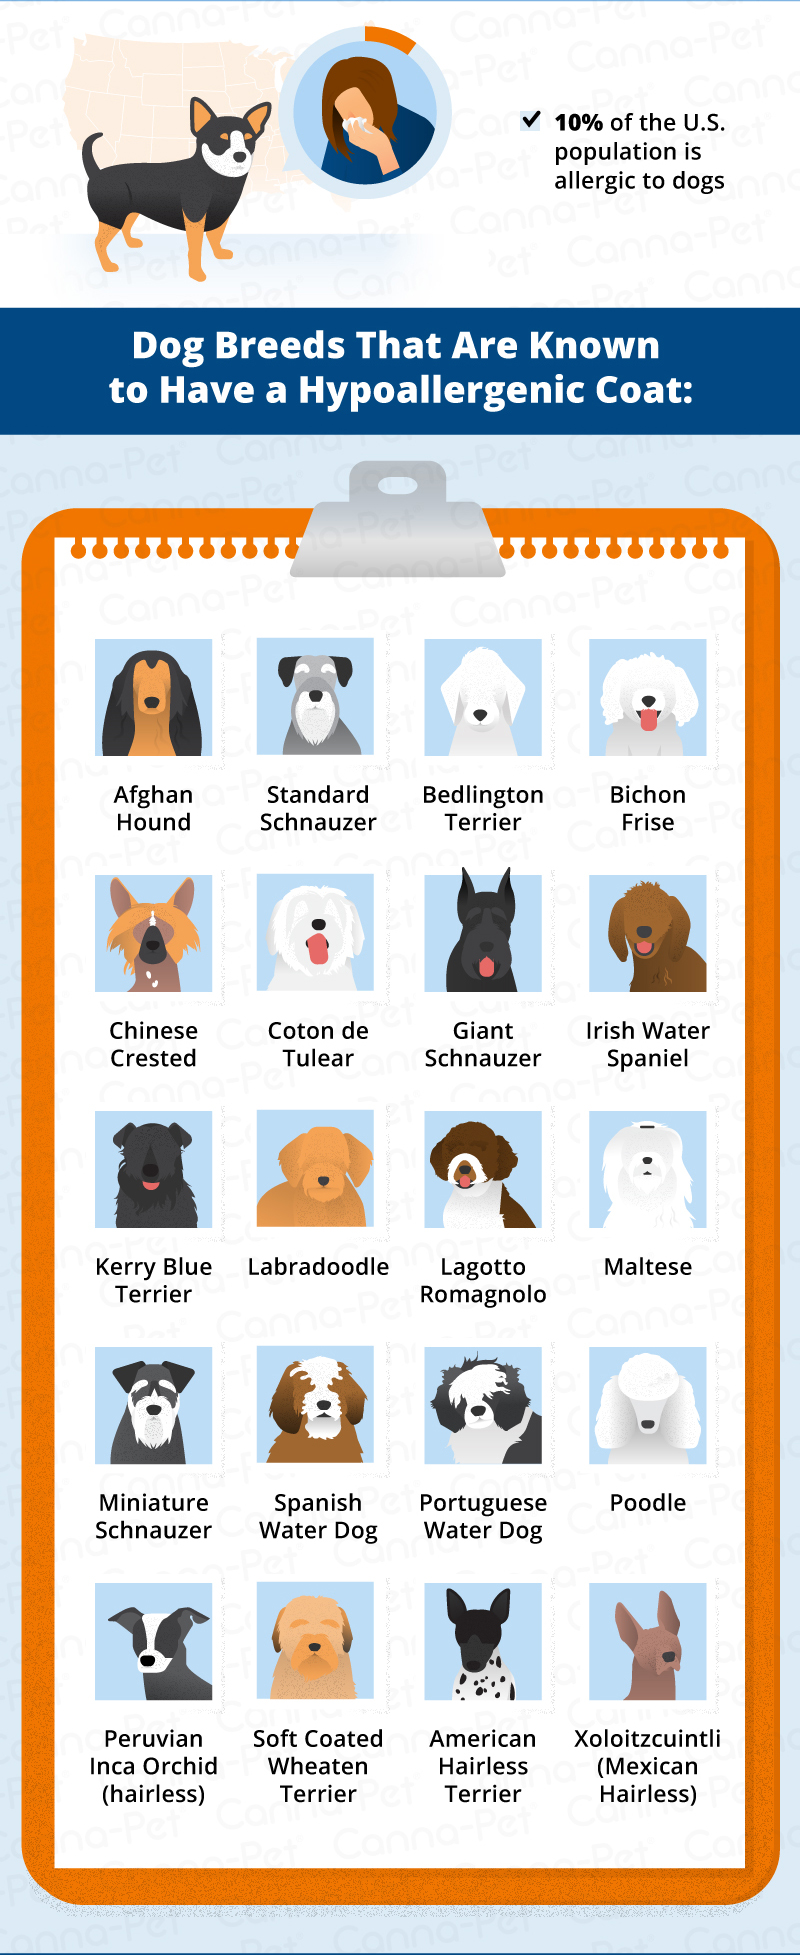 dogs breeds that are known to have a hypoallergenic coat